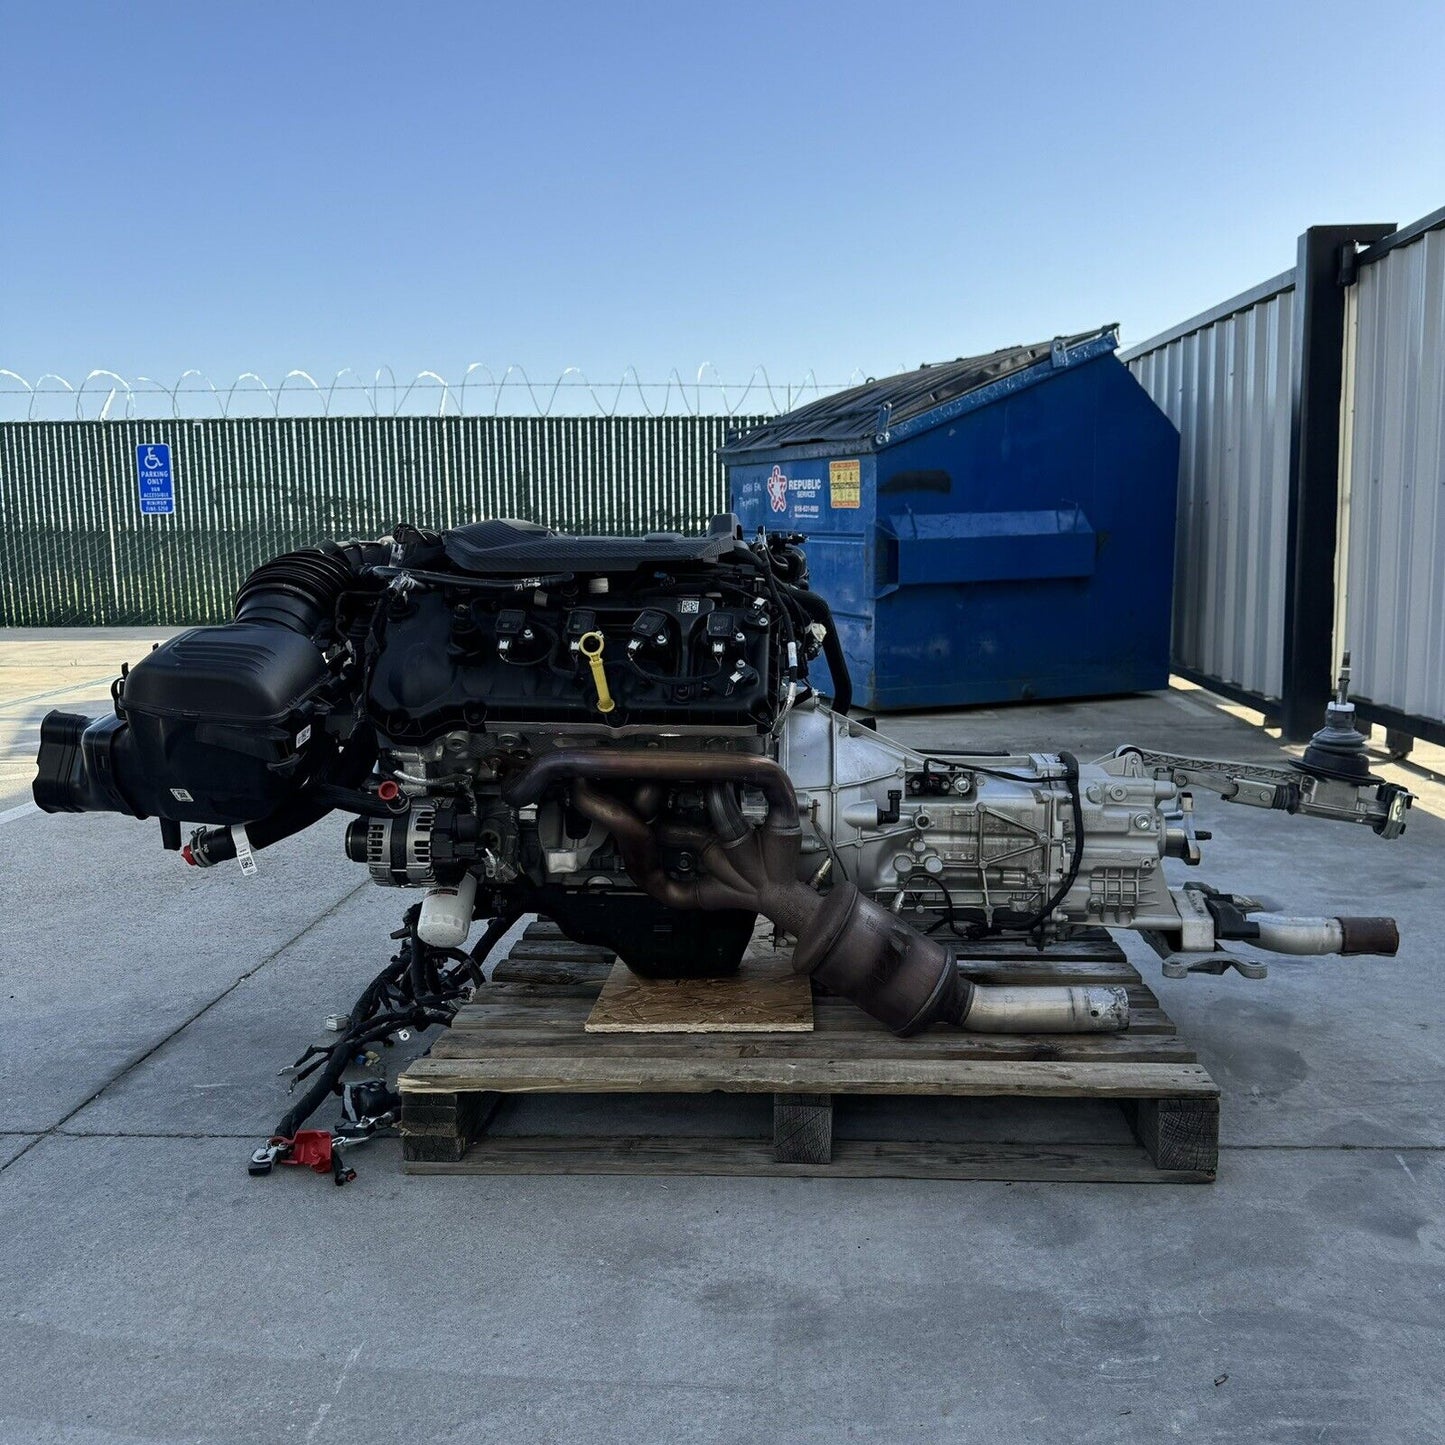 2024 FORD MUSTANG GT 5.0 GEN 4 COYOTE ENGINE W/ MANUAL TRANSMISSION S650 480HP OEM